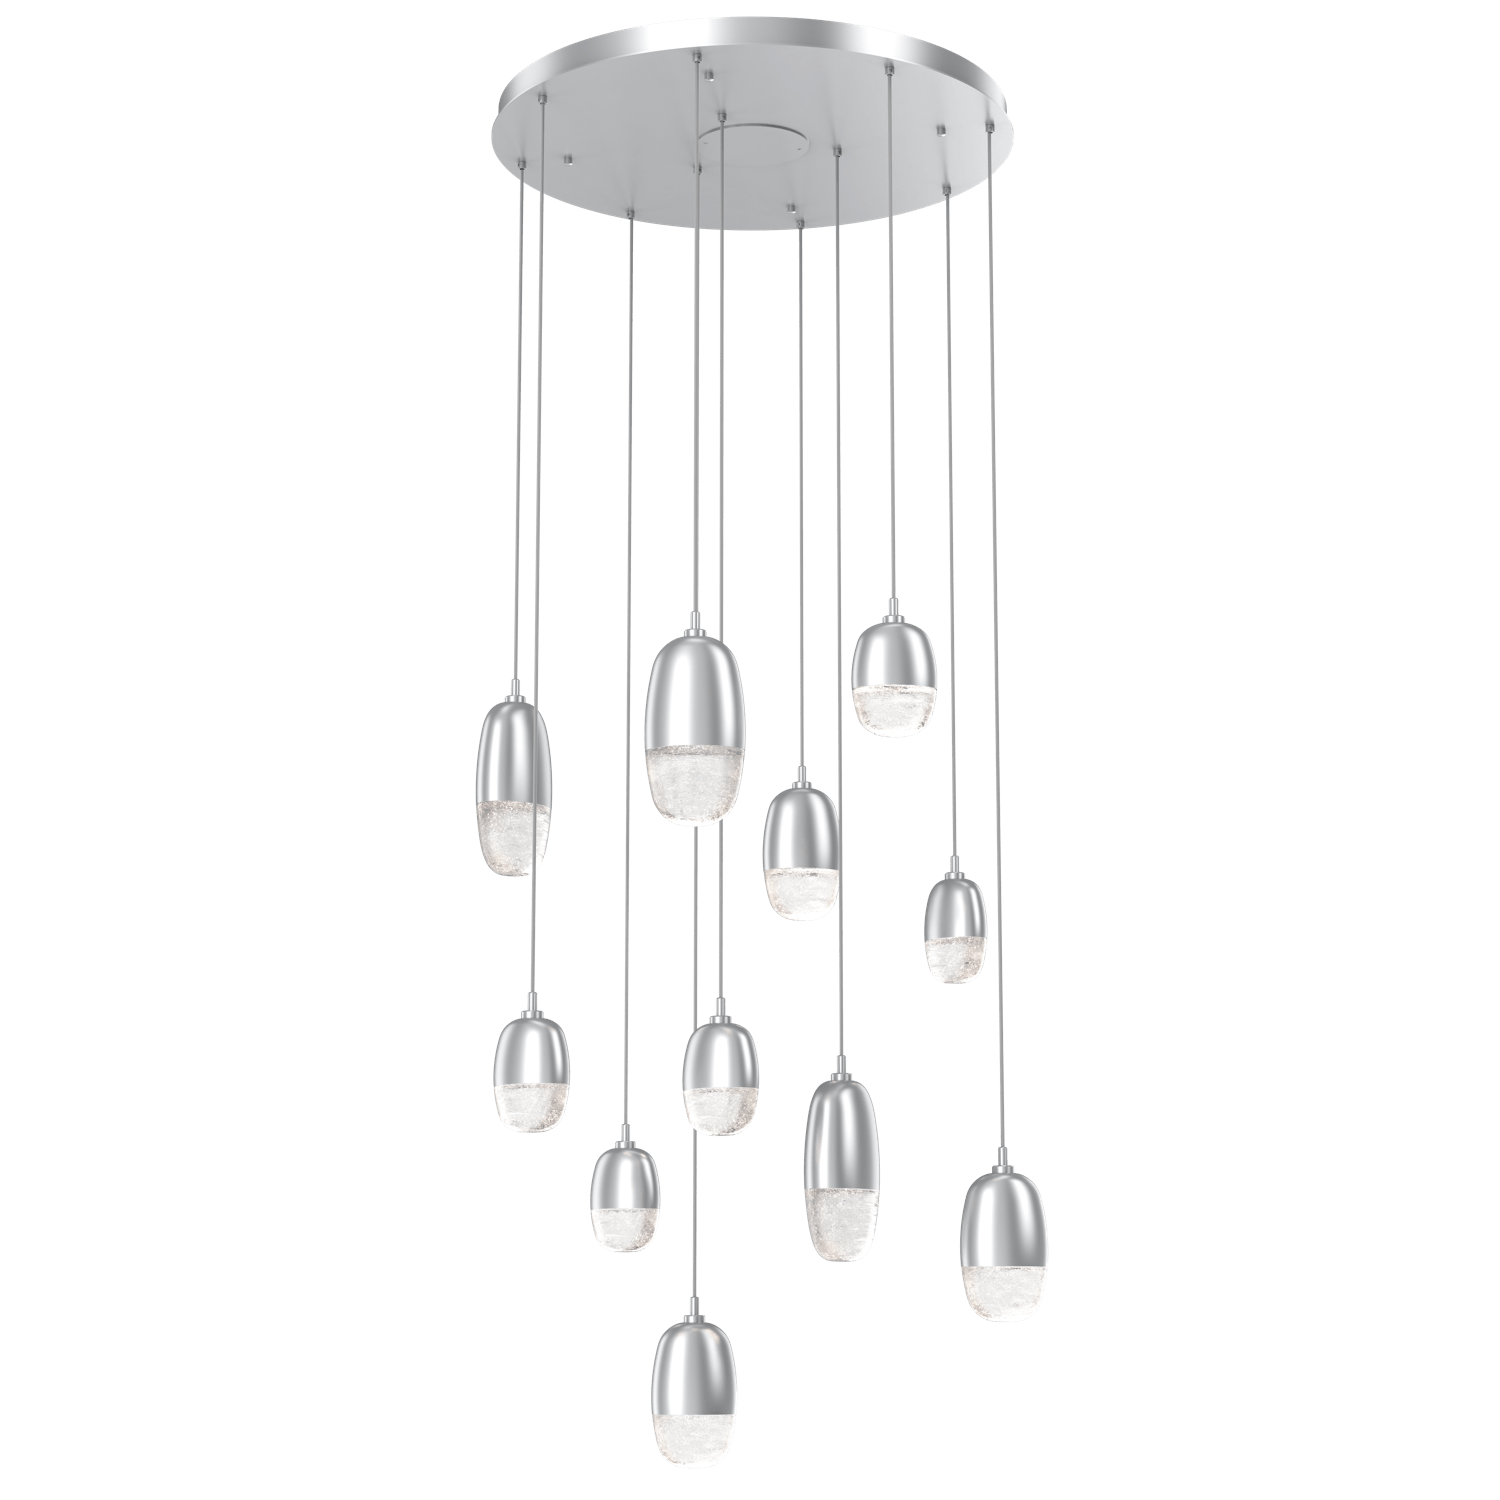 CHB0079-11-CS-Hammerton-Studio-Pebble-11-light-round-pendant-chandelier-with-classic-silver-finish-and-clear-cast-glass-shades-and-LED-lamping